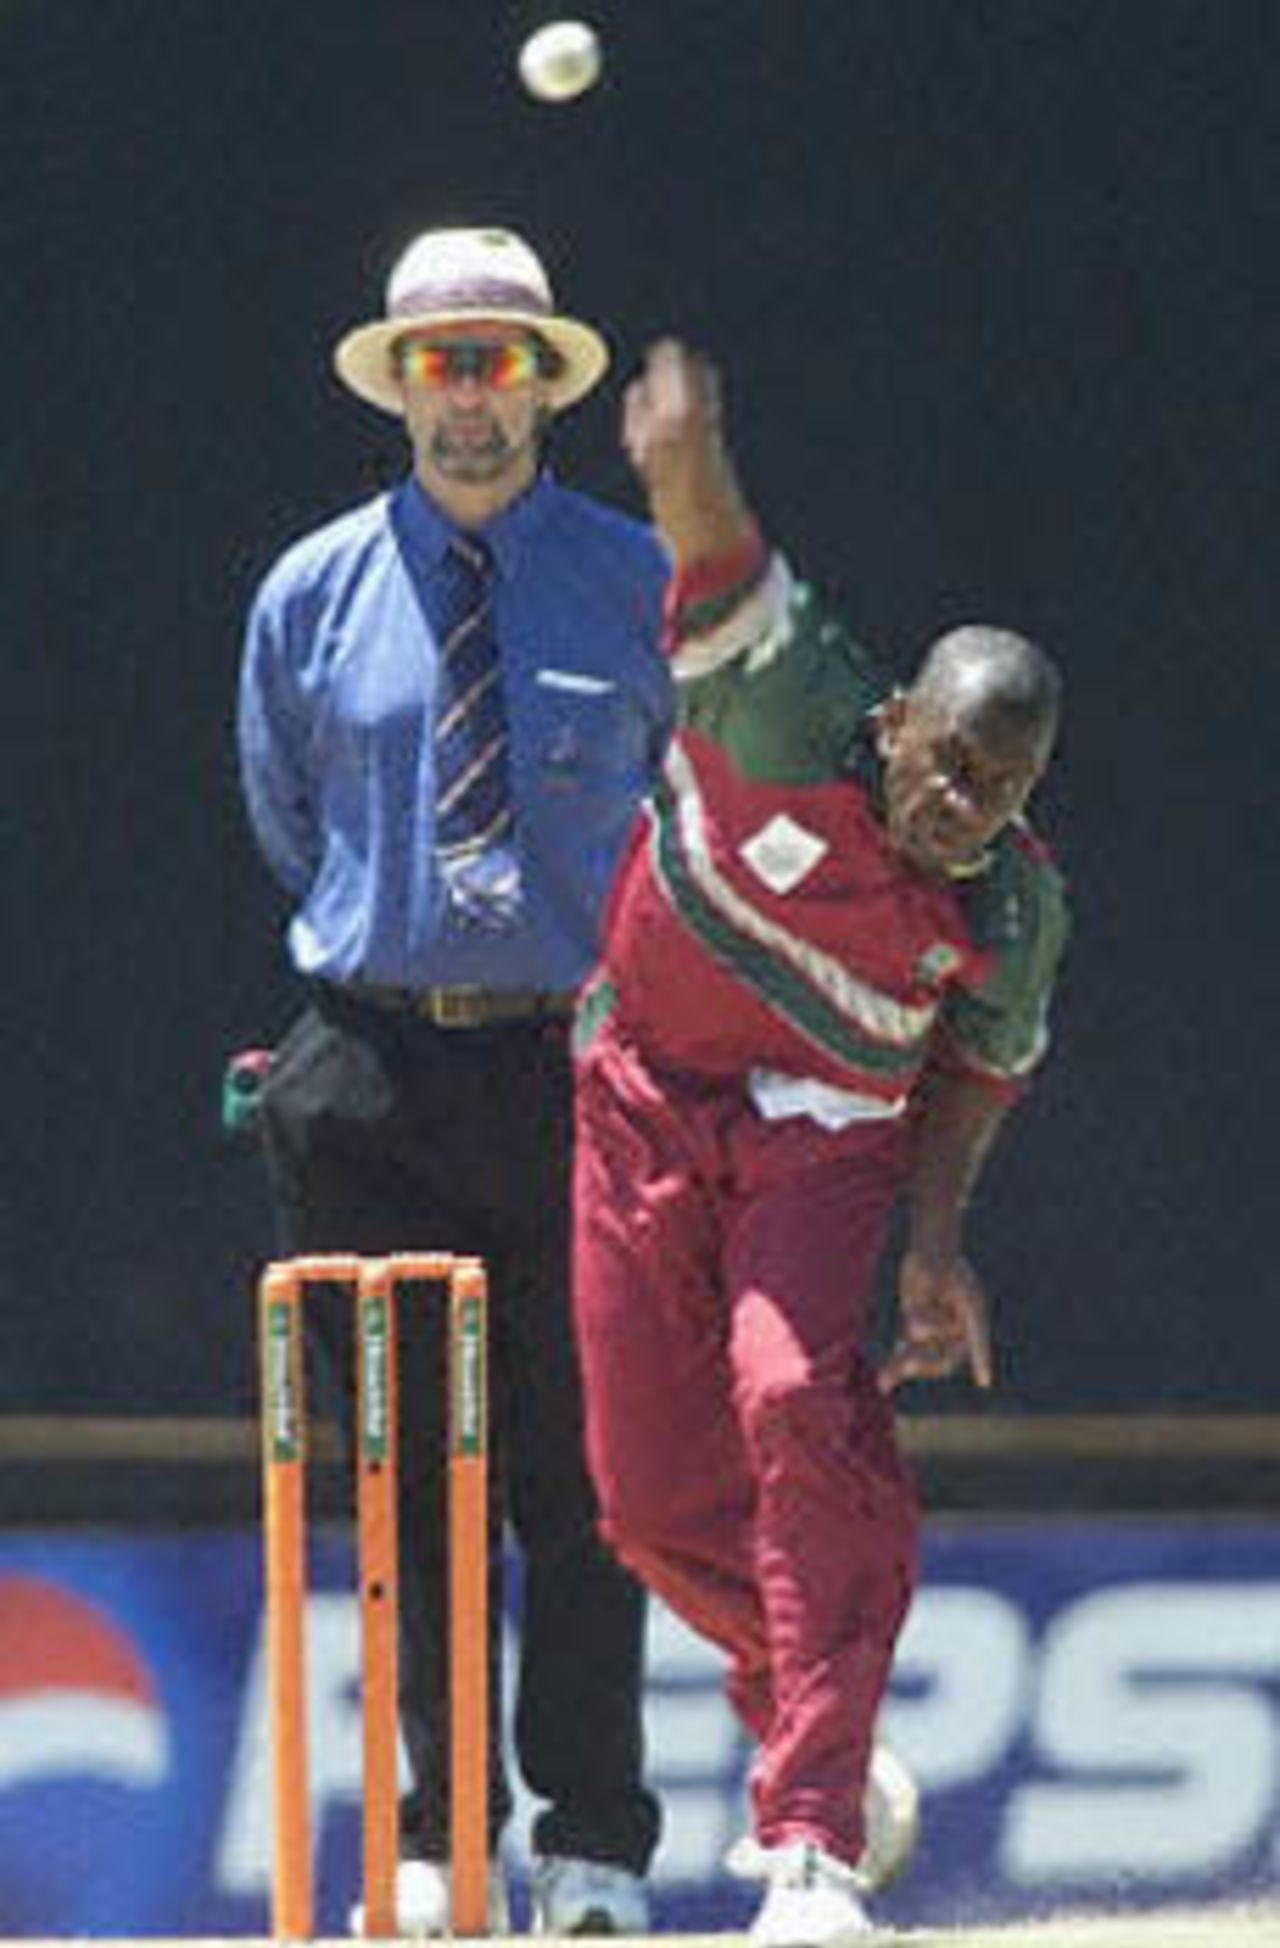 West Indies bowler Laurie Williams bowls during the second match of the ICC KnockOut, 2000/01, 2nd Preliminary Quarter Final, Sri Lanka v West Indies, Gymkhana Club Ground, Nairobi, 04 October 2000.